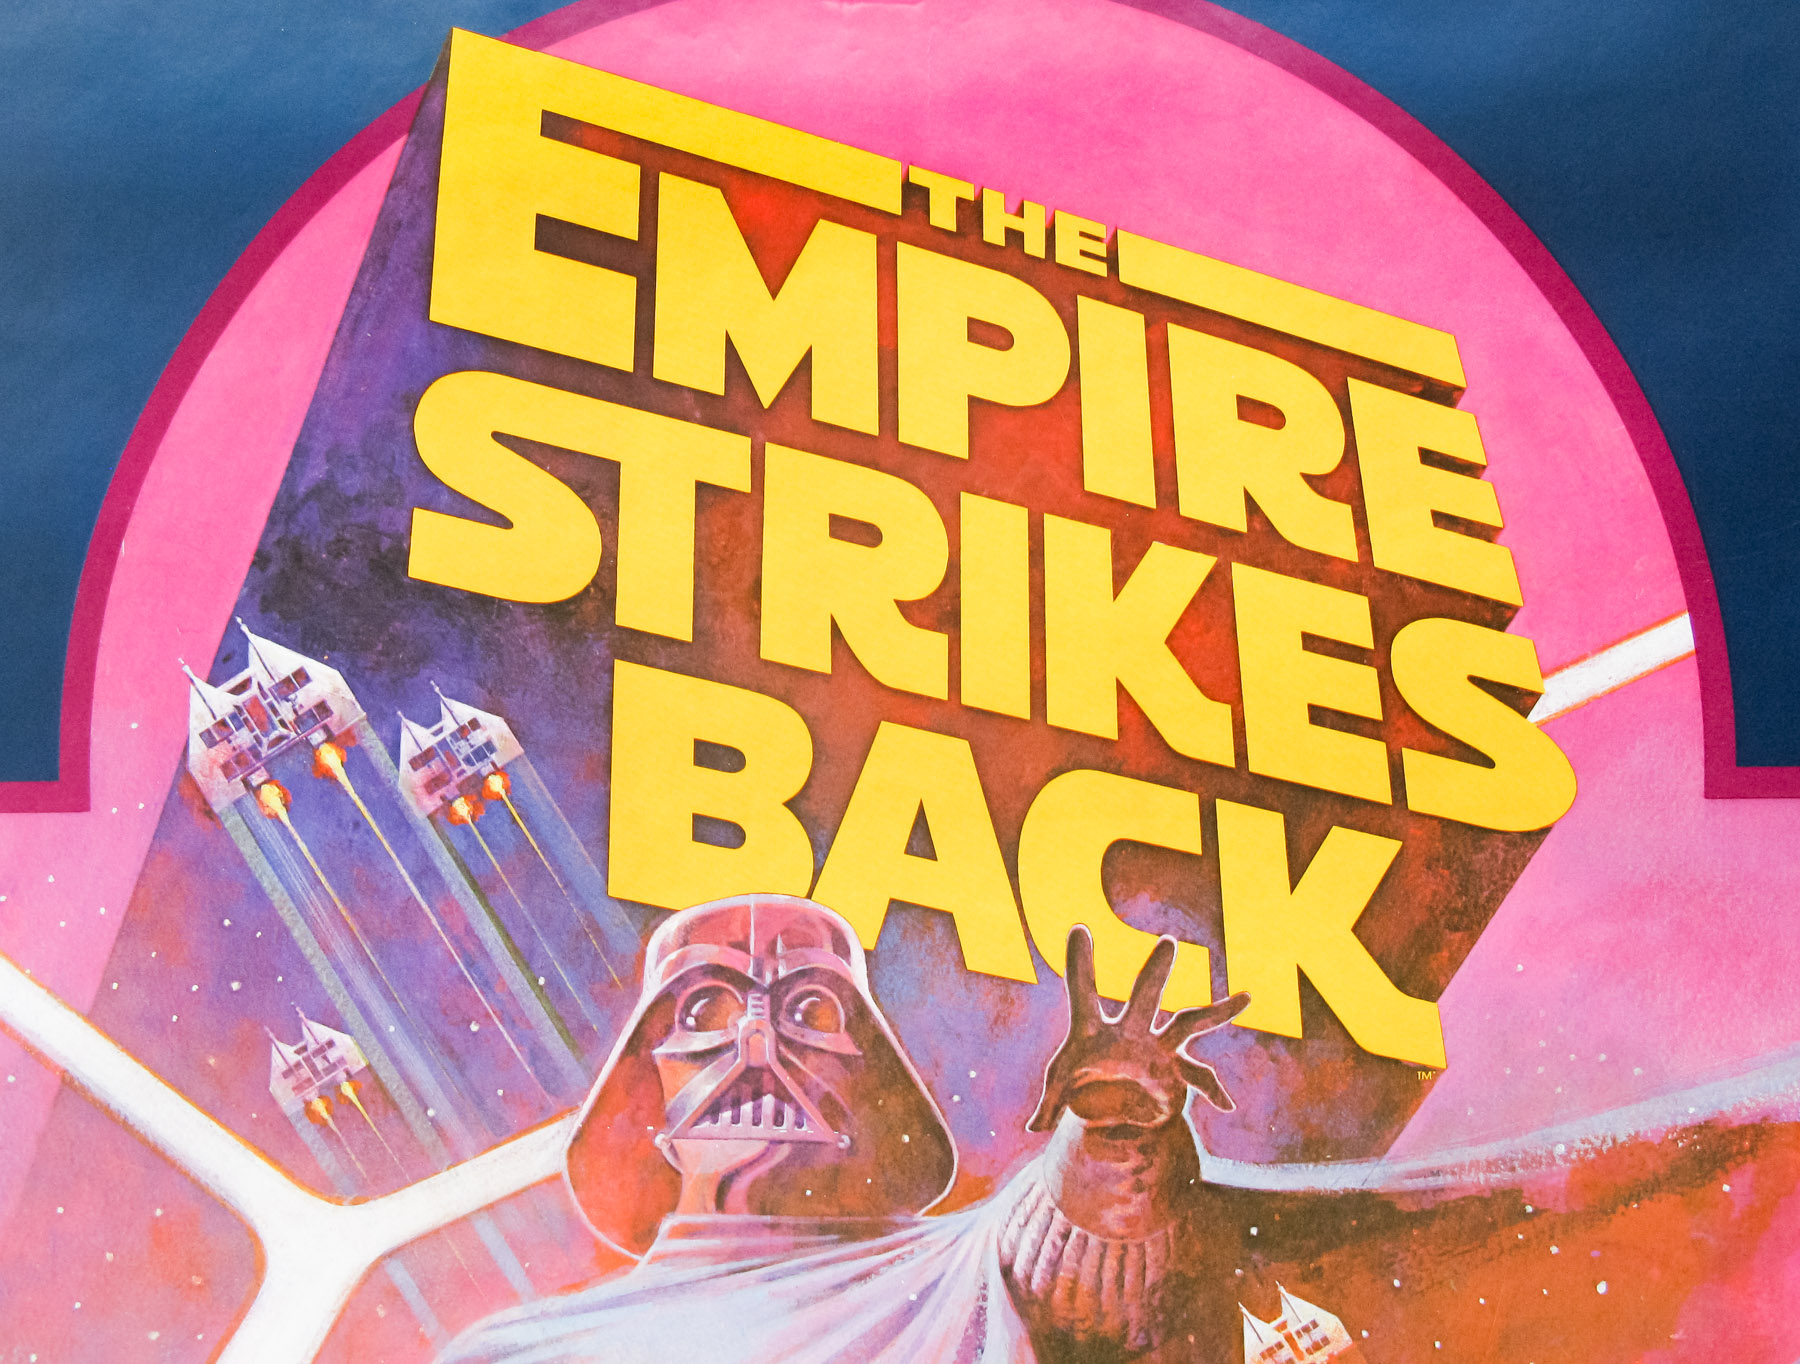 sheet version / USA / Back re-release Strikes / NSS The Empire one 1982